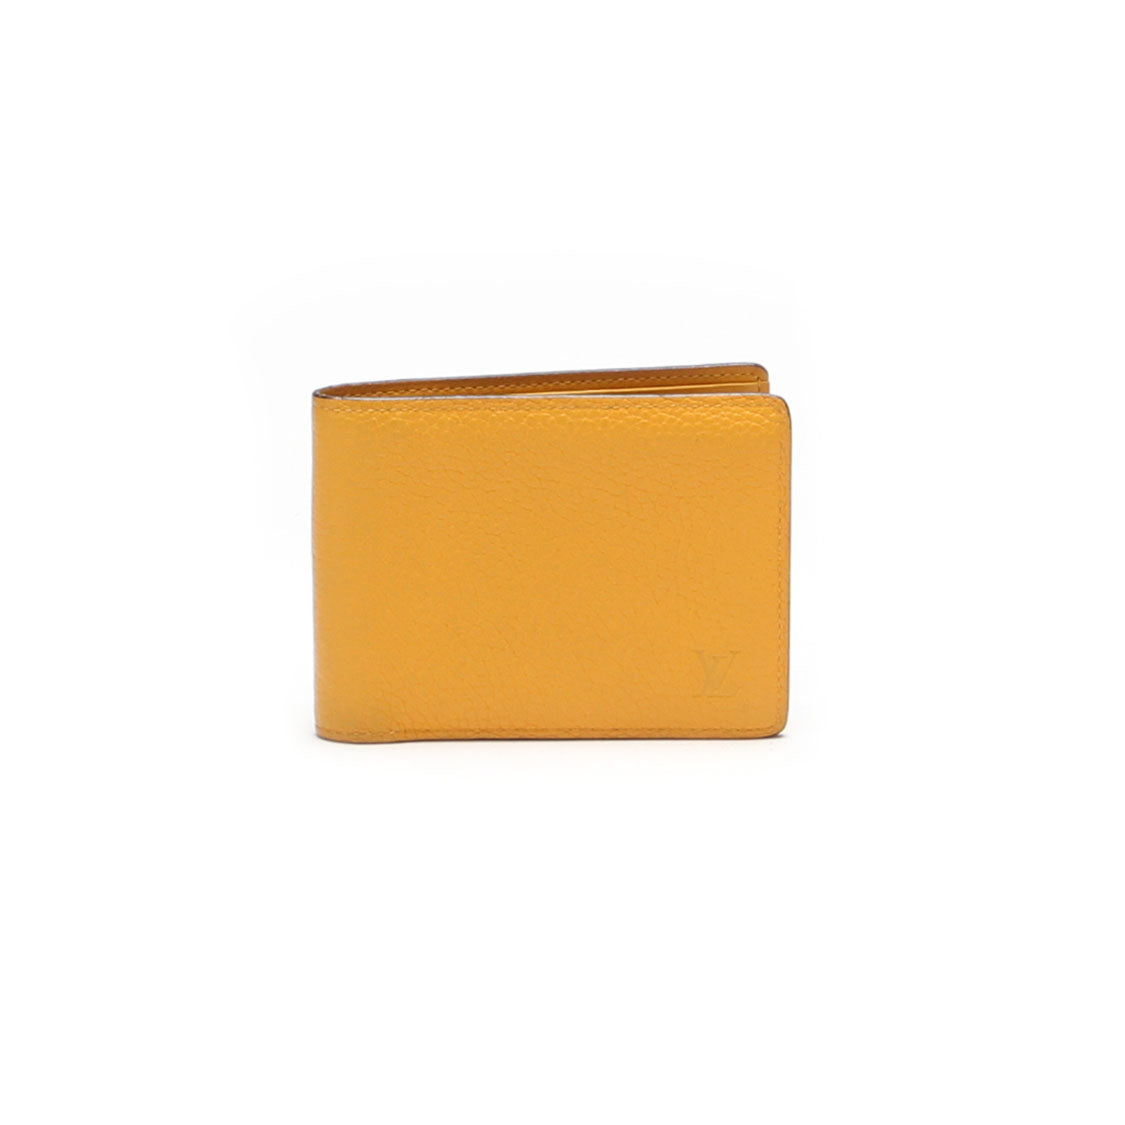 Authentic Louis Vuitton Yellow Epi Leather Bill-Fold Wallet